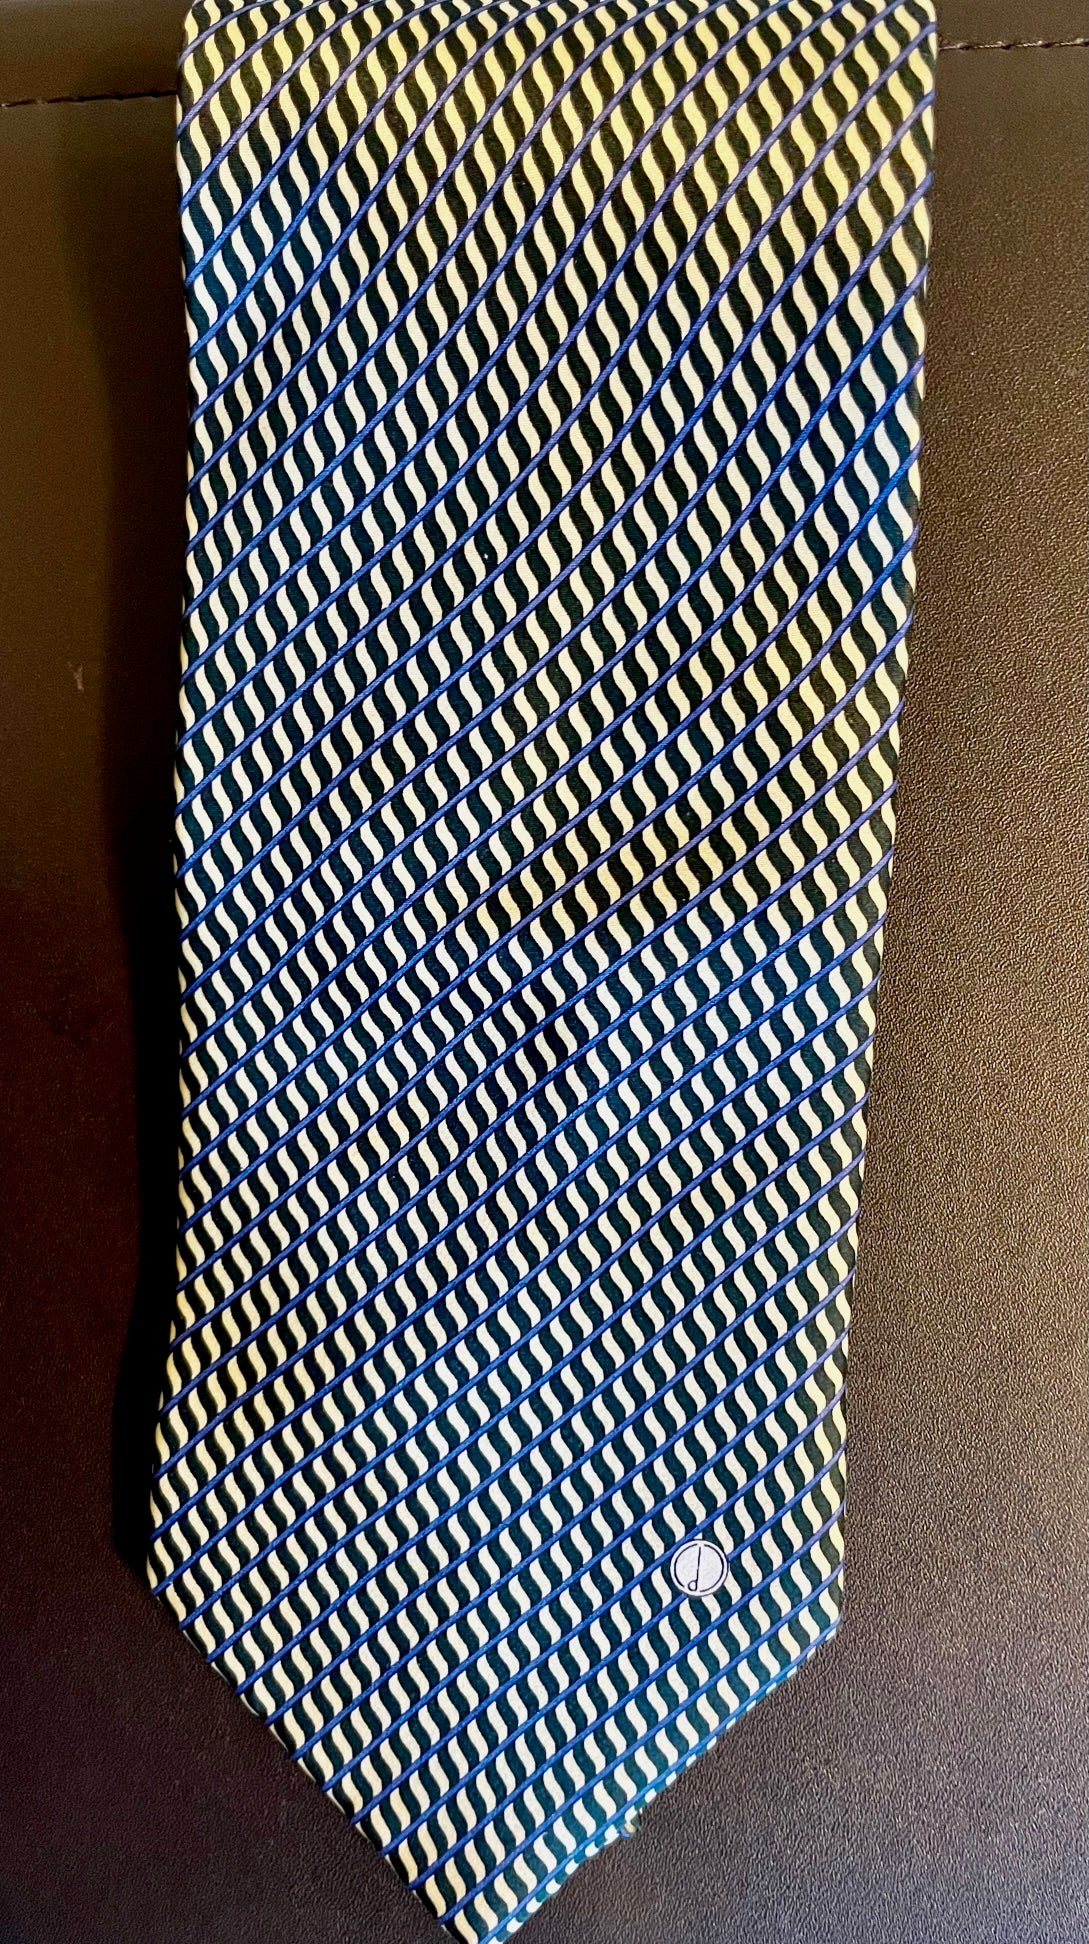 Alfred  Dunhill ties silk navy blue and gold necktie